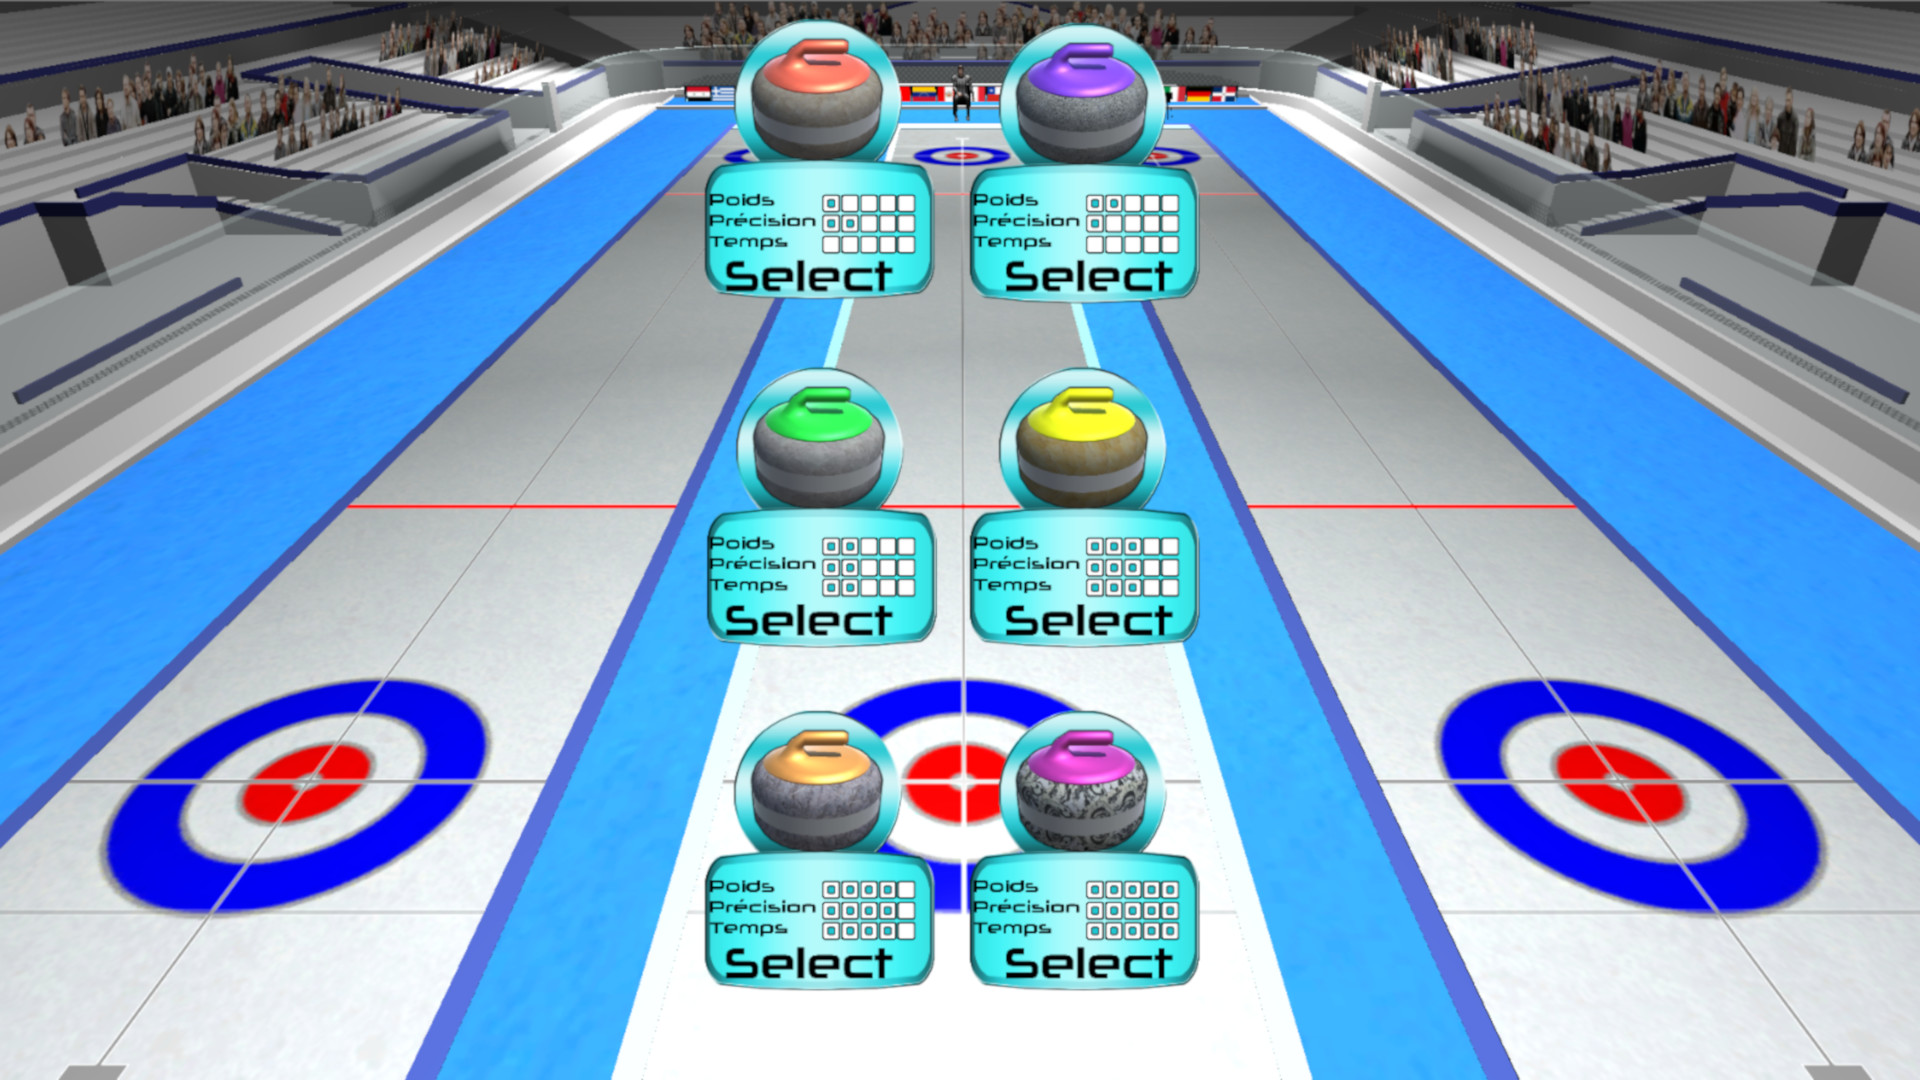 curling video on demand